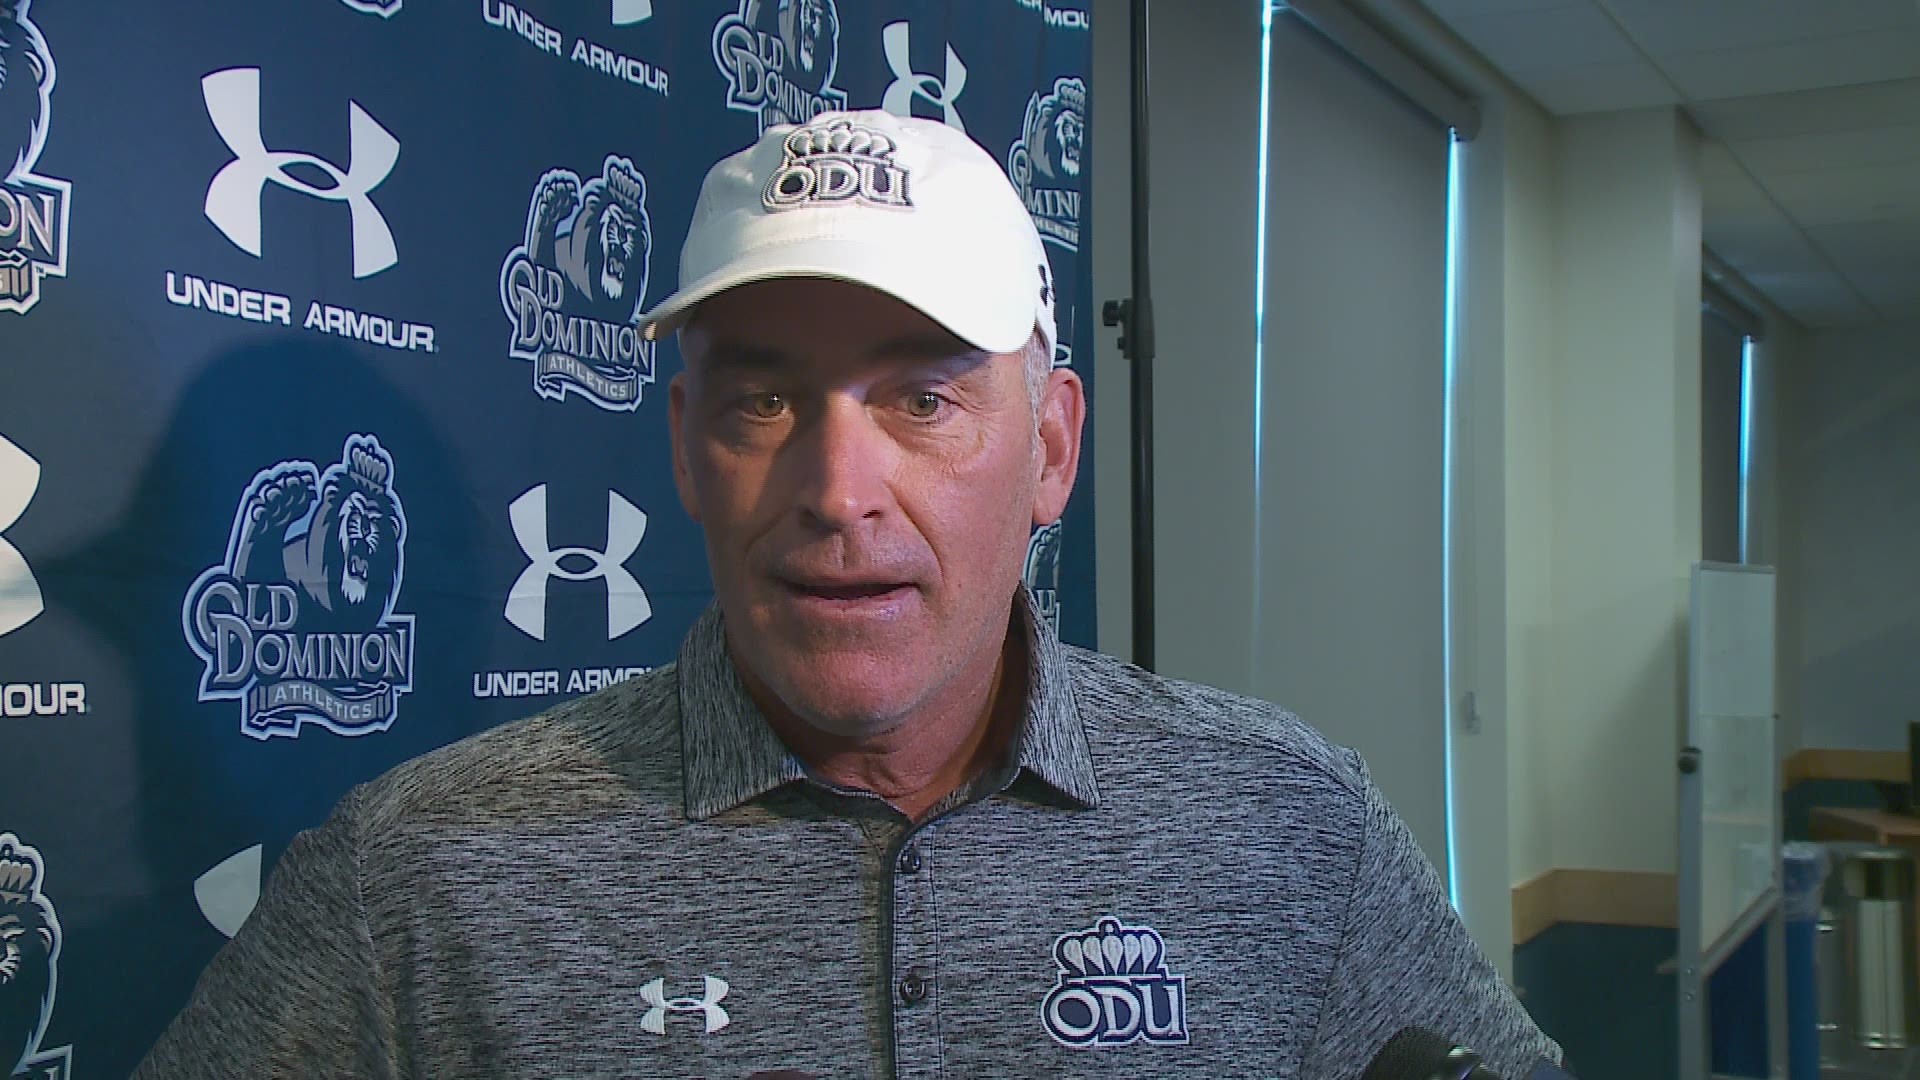 The best of ODU head coach Bobby Wilder from this weekly Monday press conference.